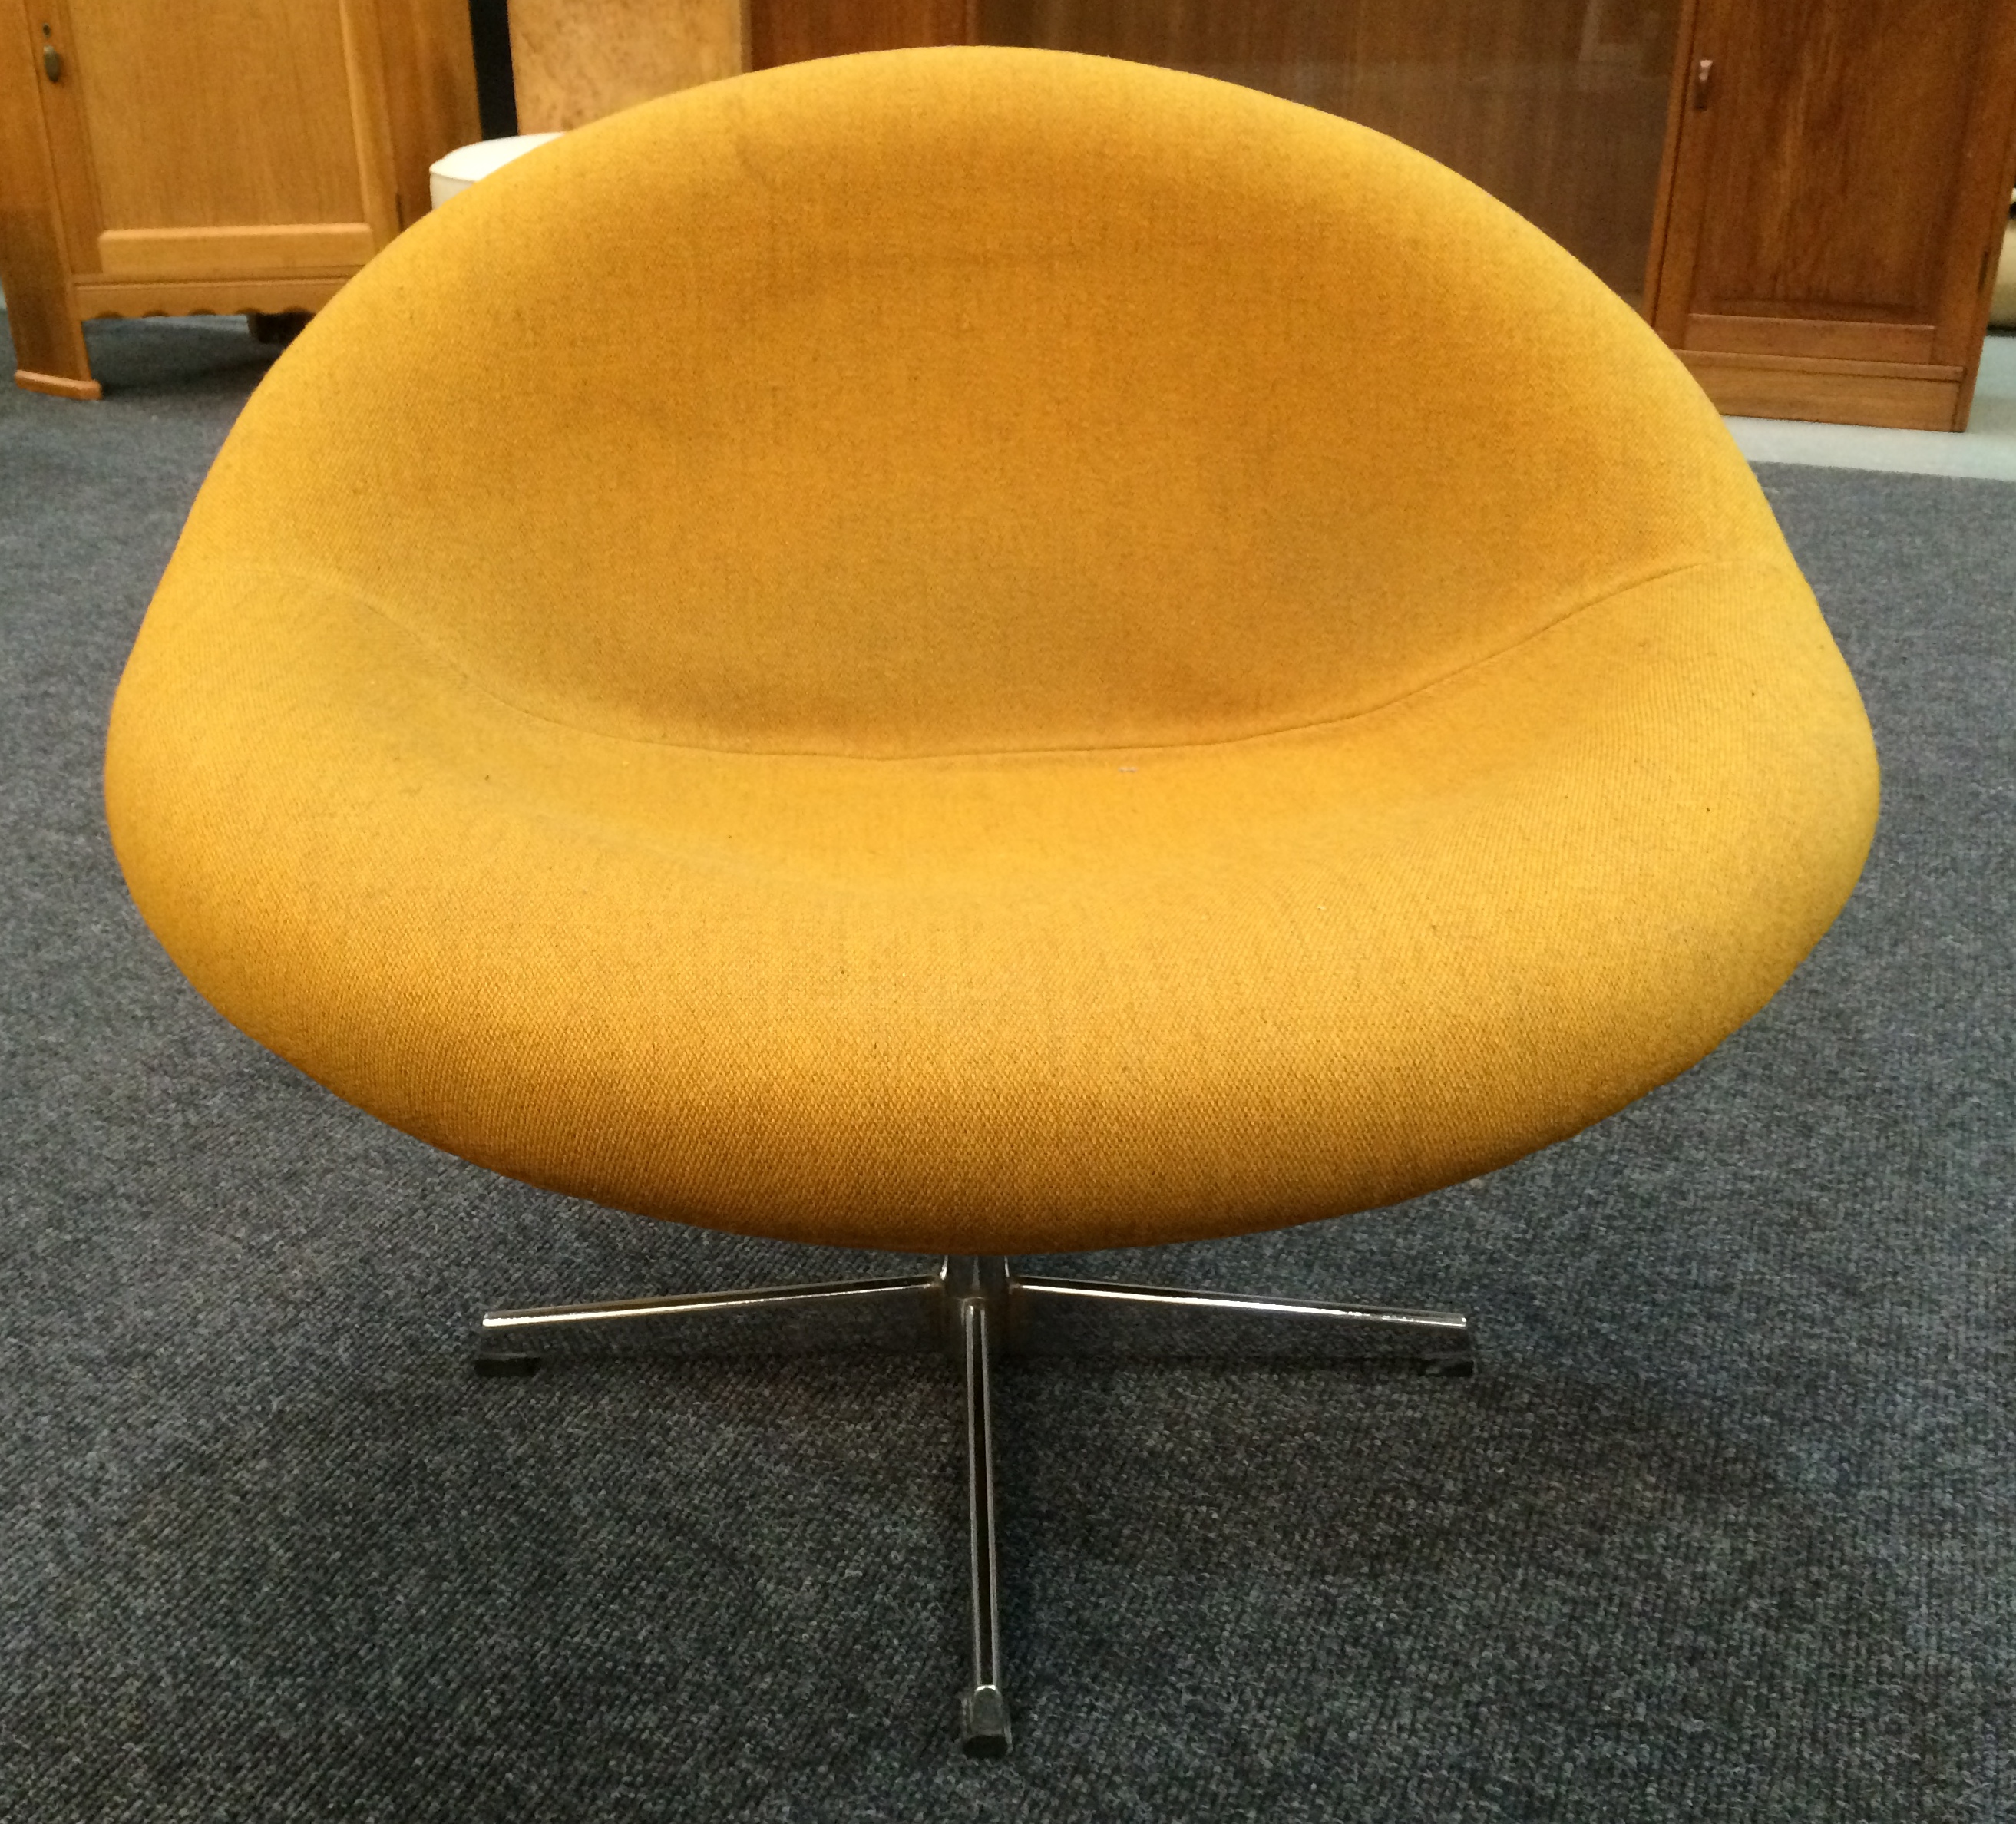 Heals - A 'Juliet' swivel chair, upholstered in a mustard coloured hopsack cloth over the pedestal